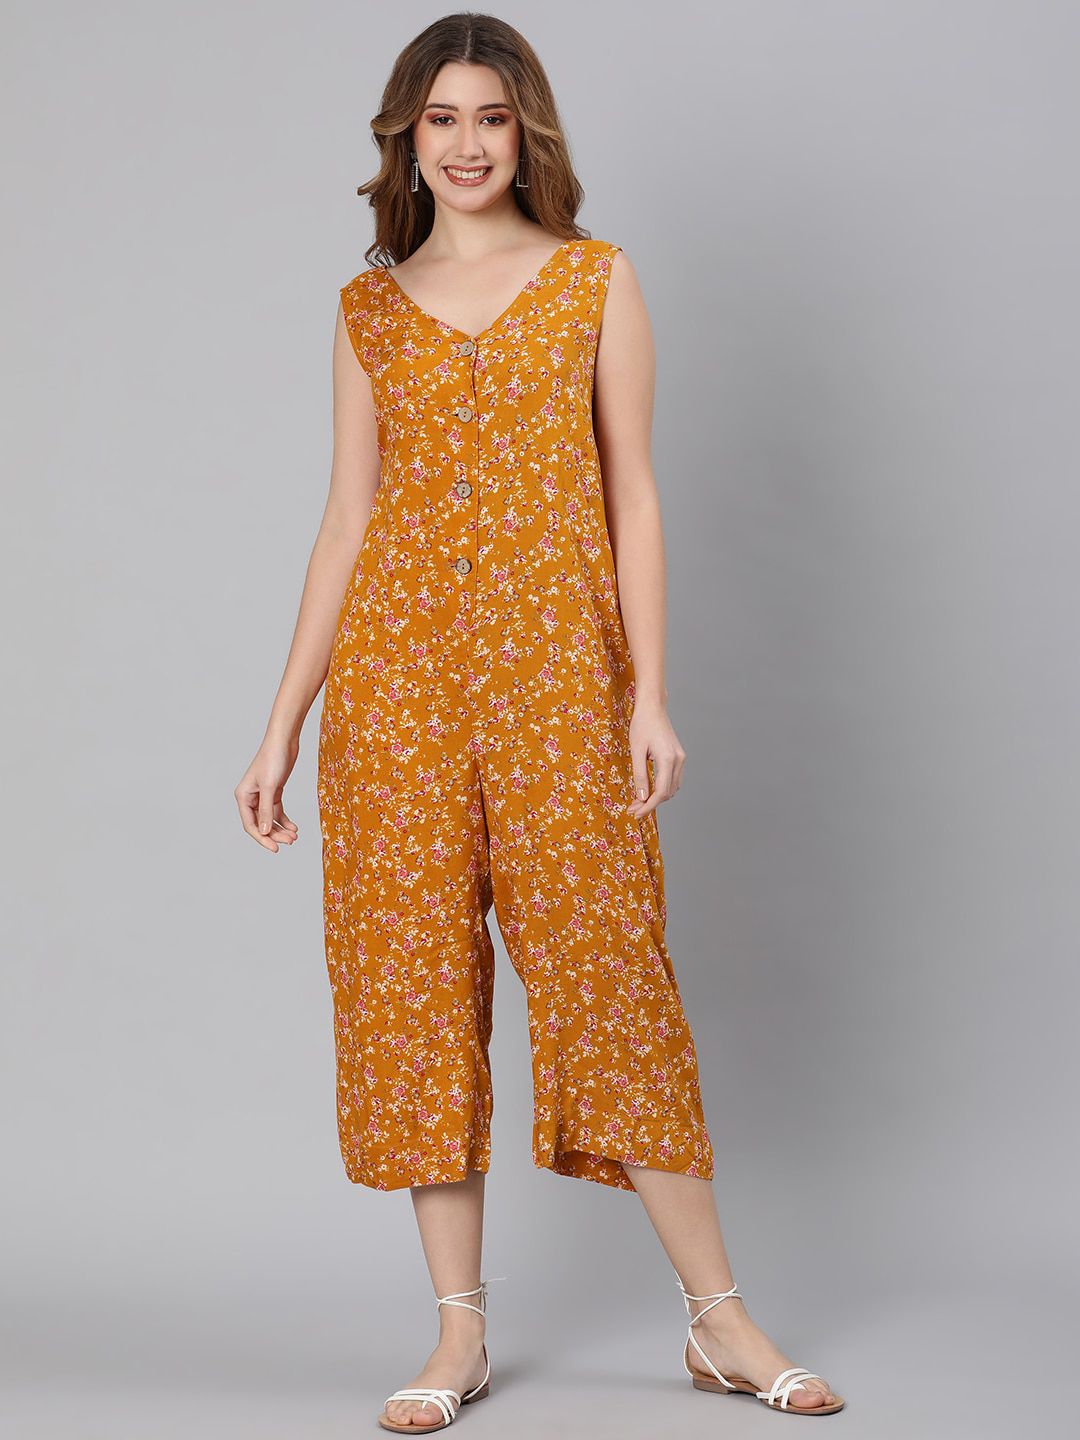 Oxolloxo Mustard & White Floral Printed Jumpsuit Price in India